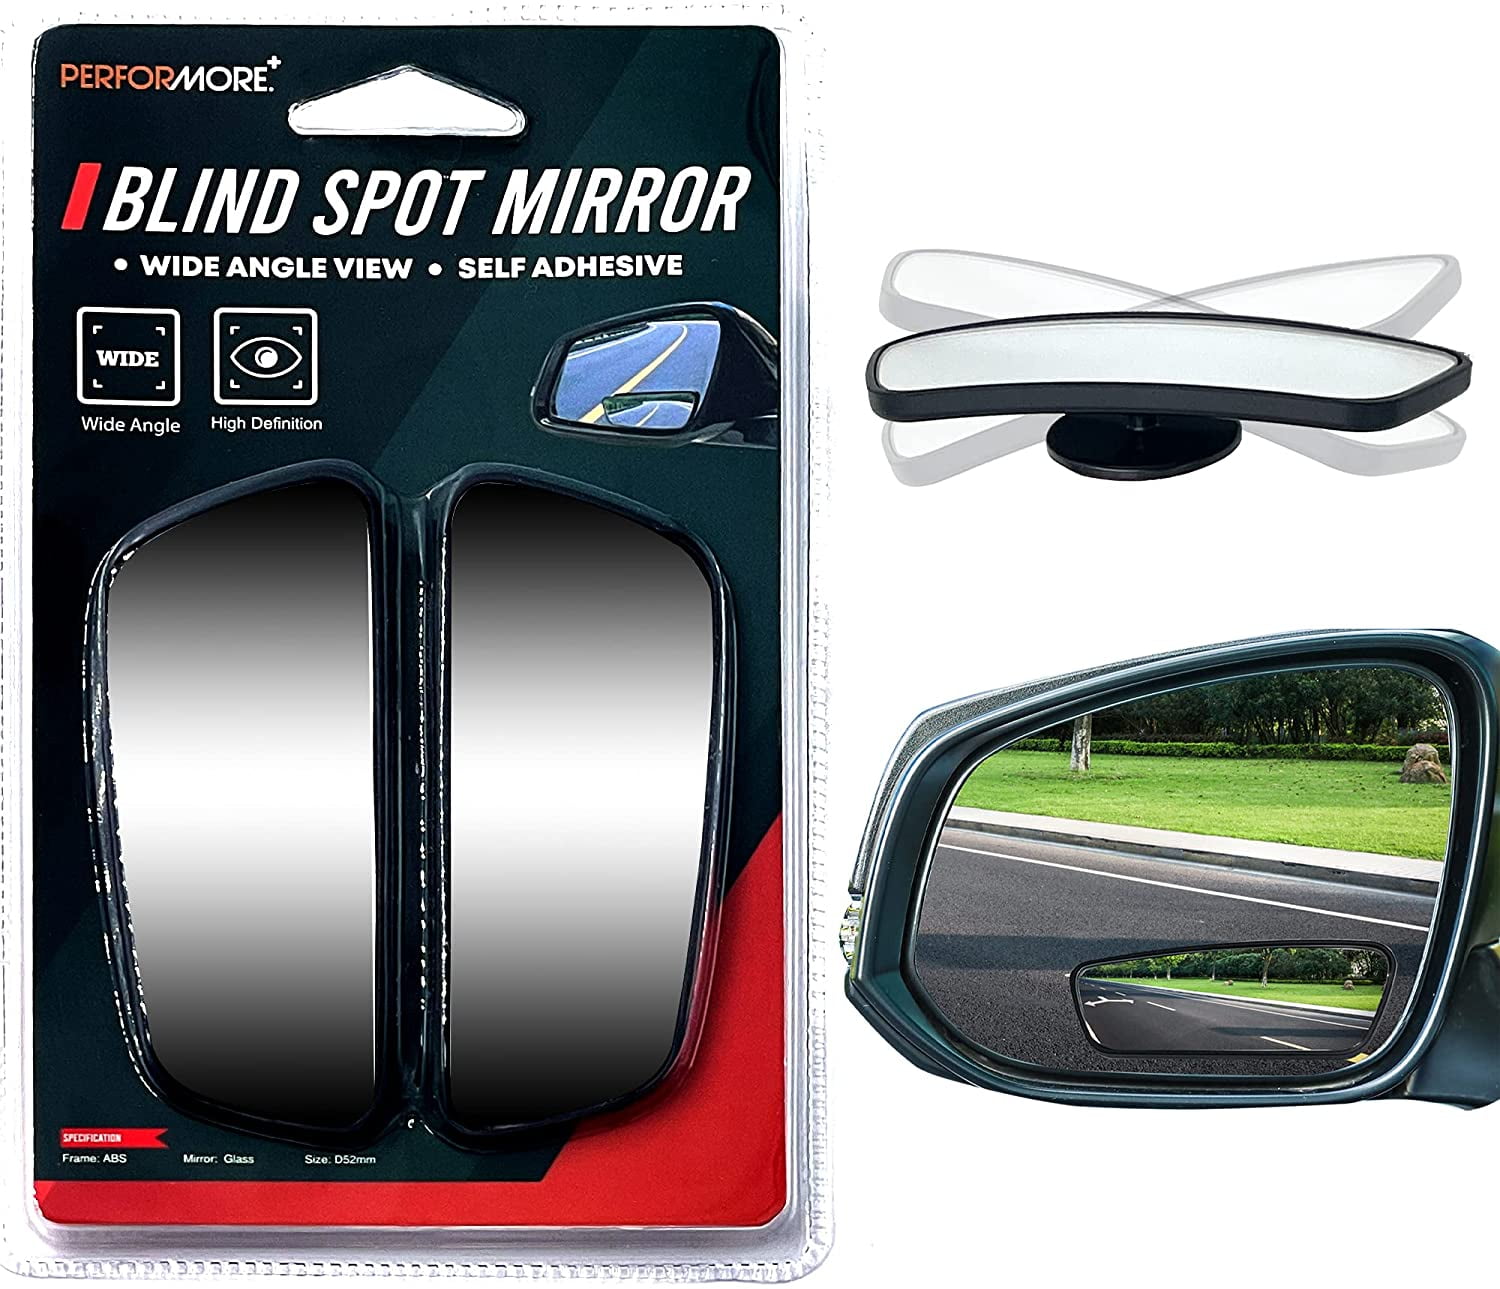 Streetwize - Easy Fix Mirror Repair Kit - 8 x 5 Inch - Cut to Size Wing  Mirror Fixing Kit - Ideal For: Cars, Vans, 4x4's and Motorhomes